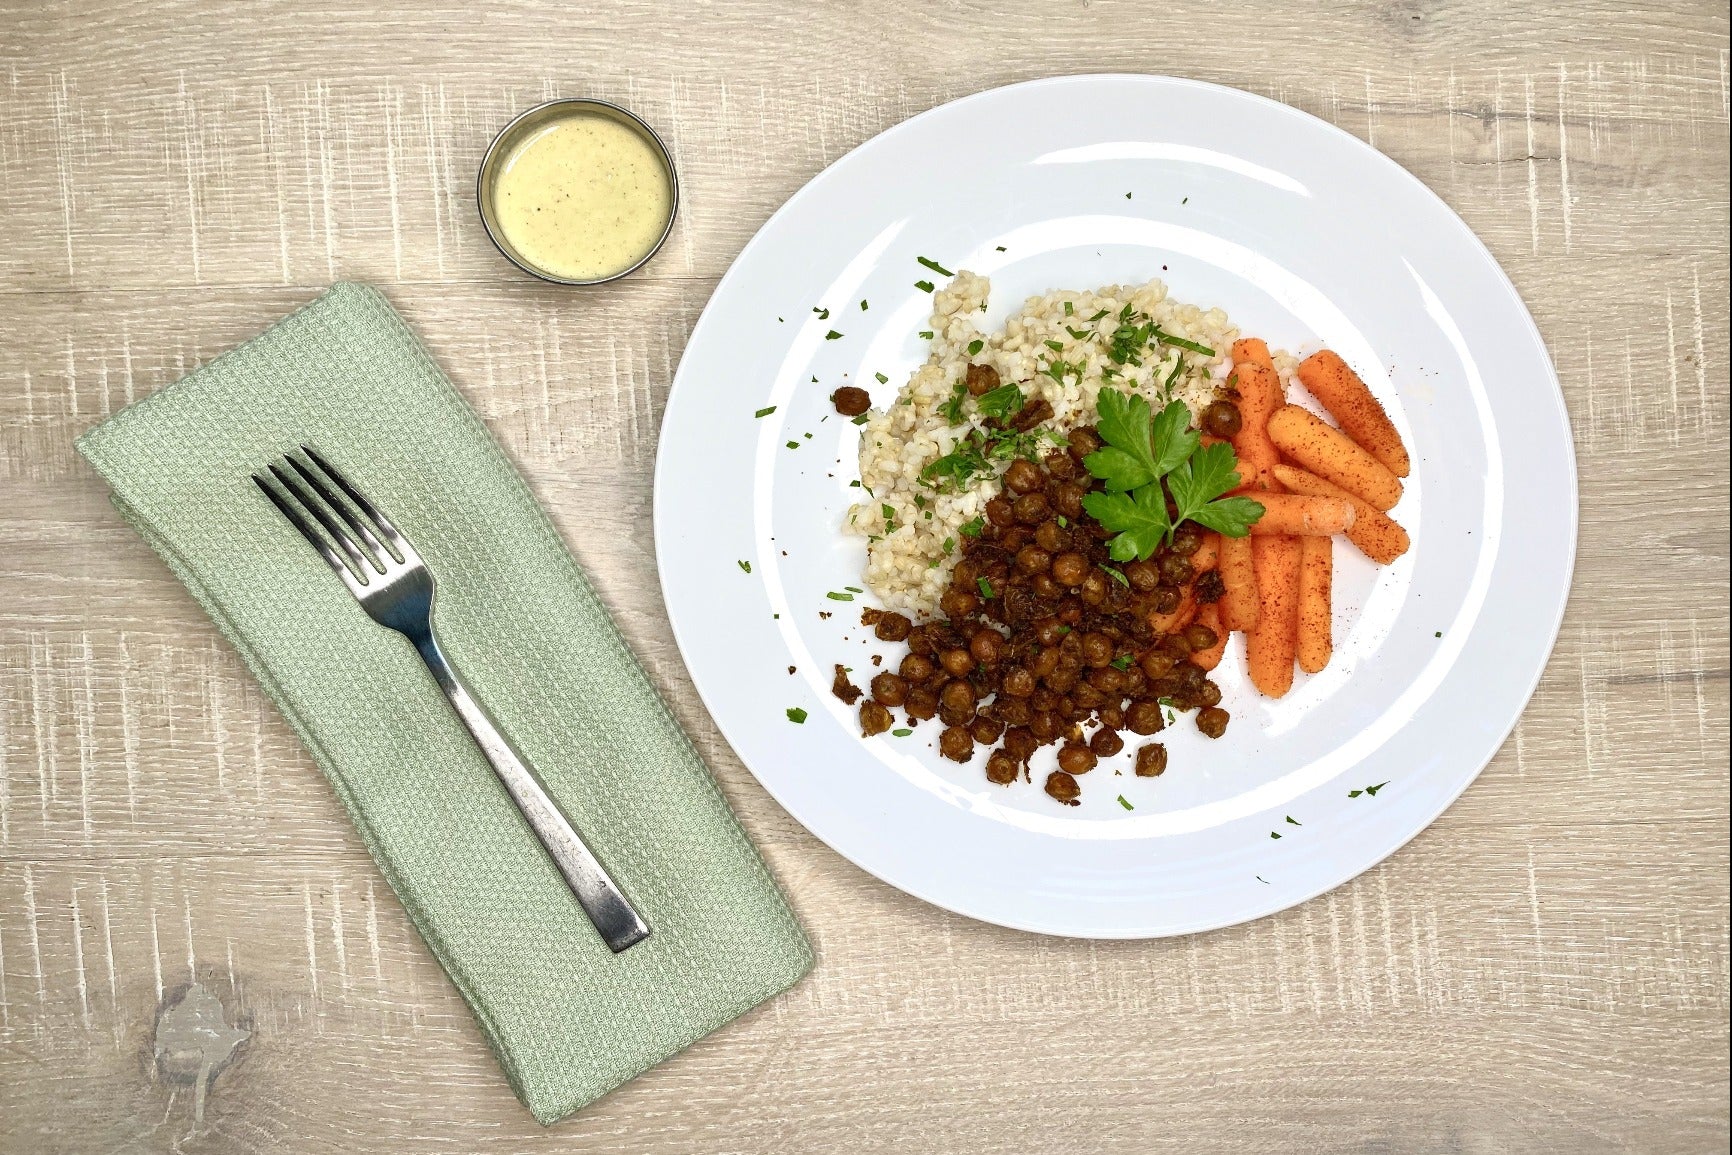 Blackened Crispy Chickpeas w/ Herbed Rice and Roasted Baby Carrots